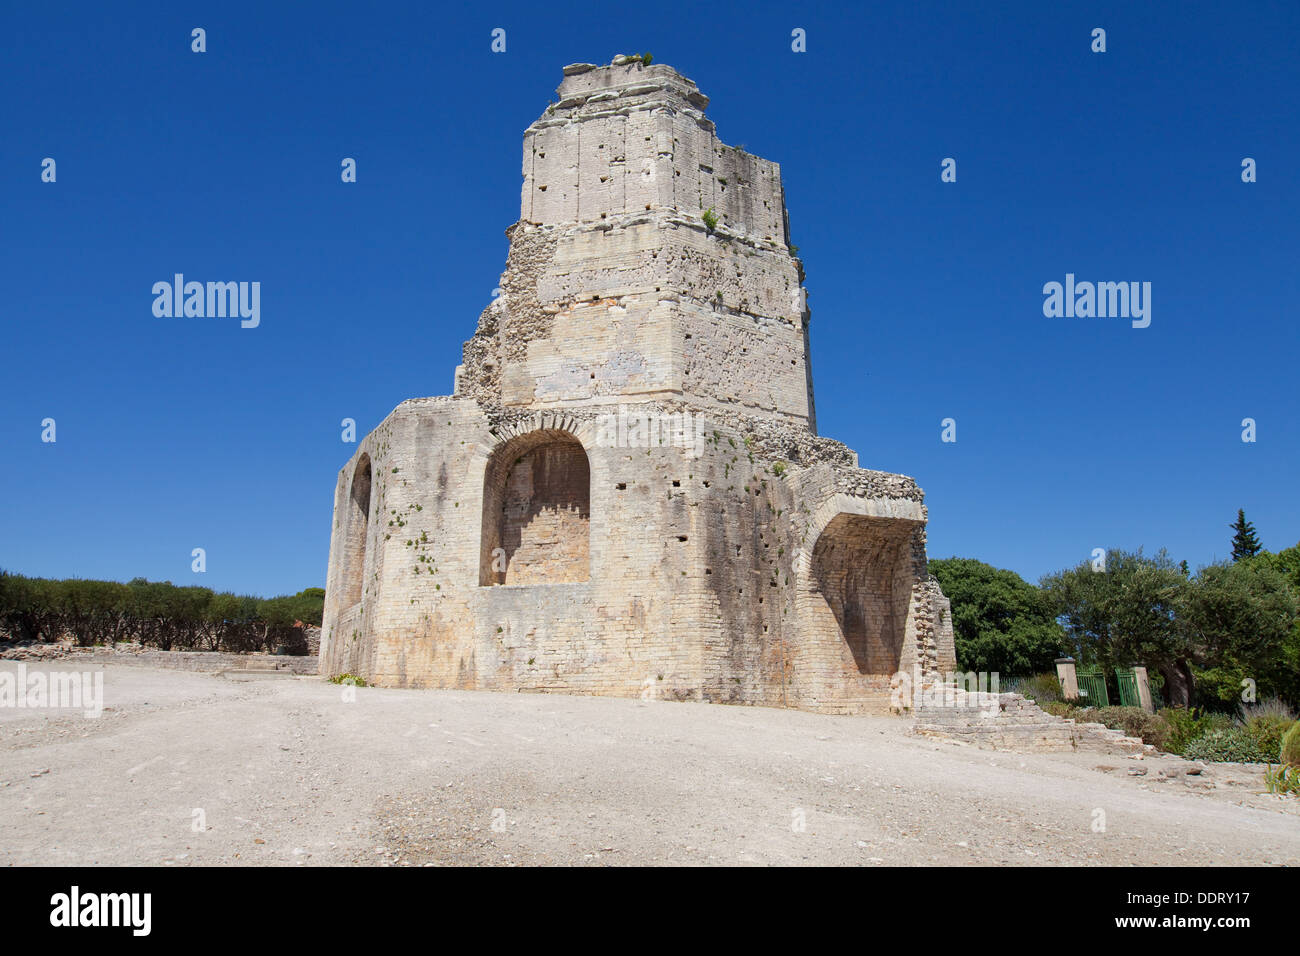 Tour Magne, roman monument in Nimes, Languedoc-Roussillon, France. Stock Photo